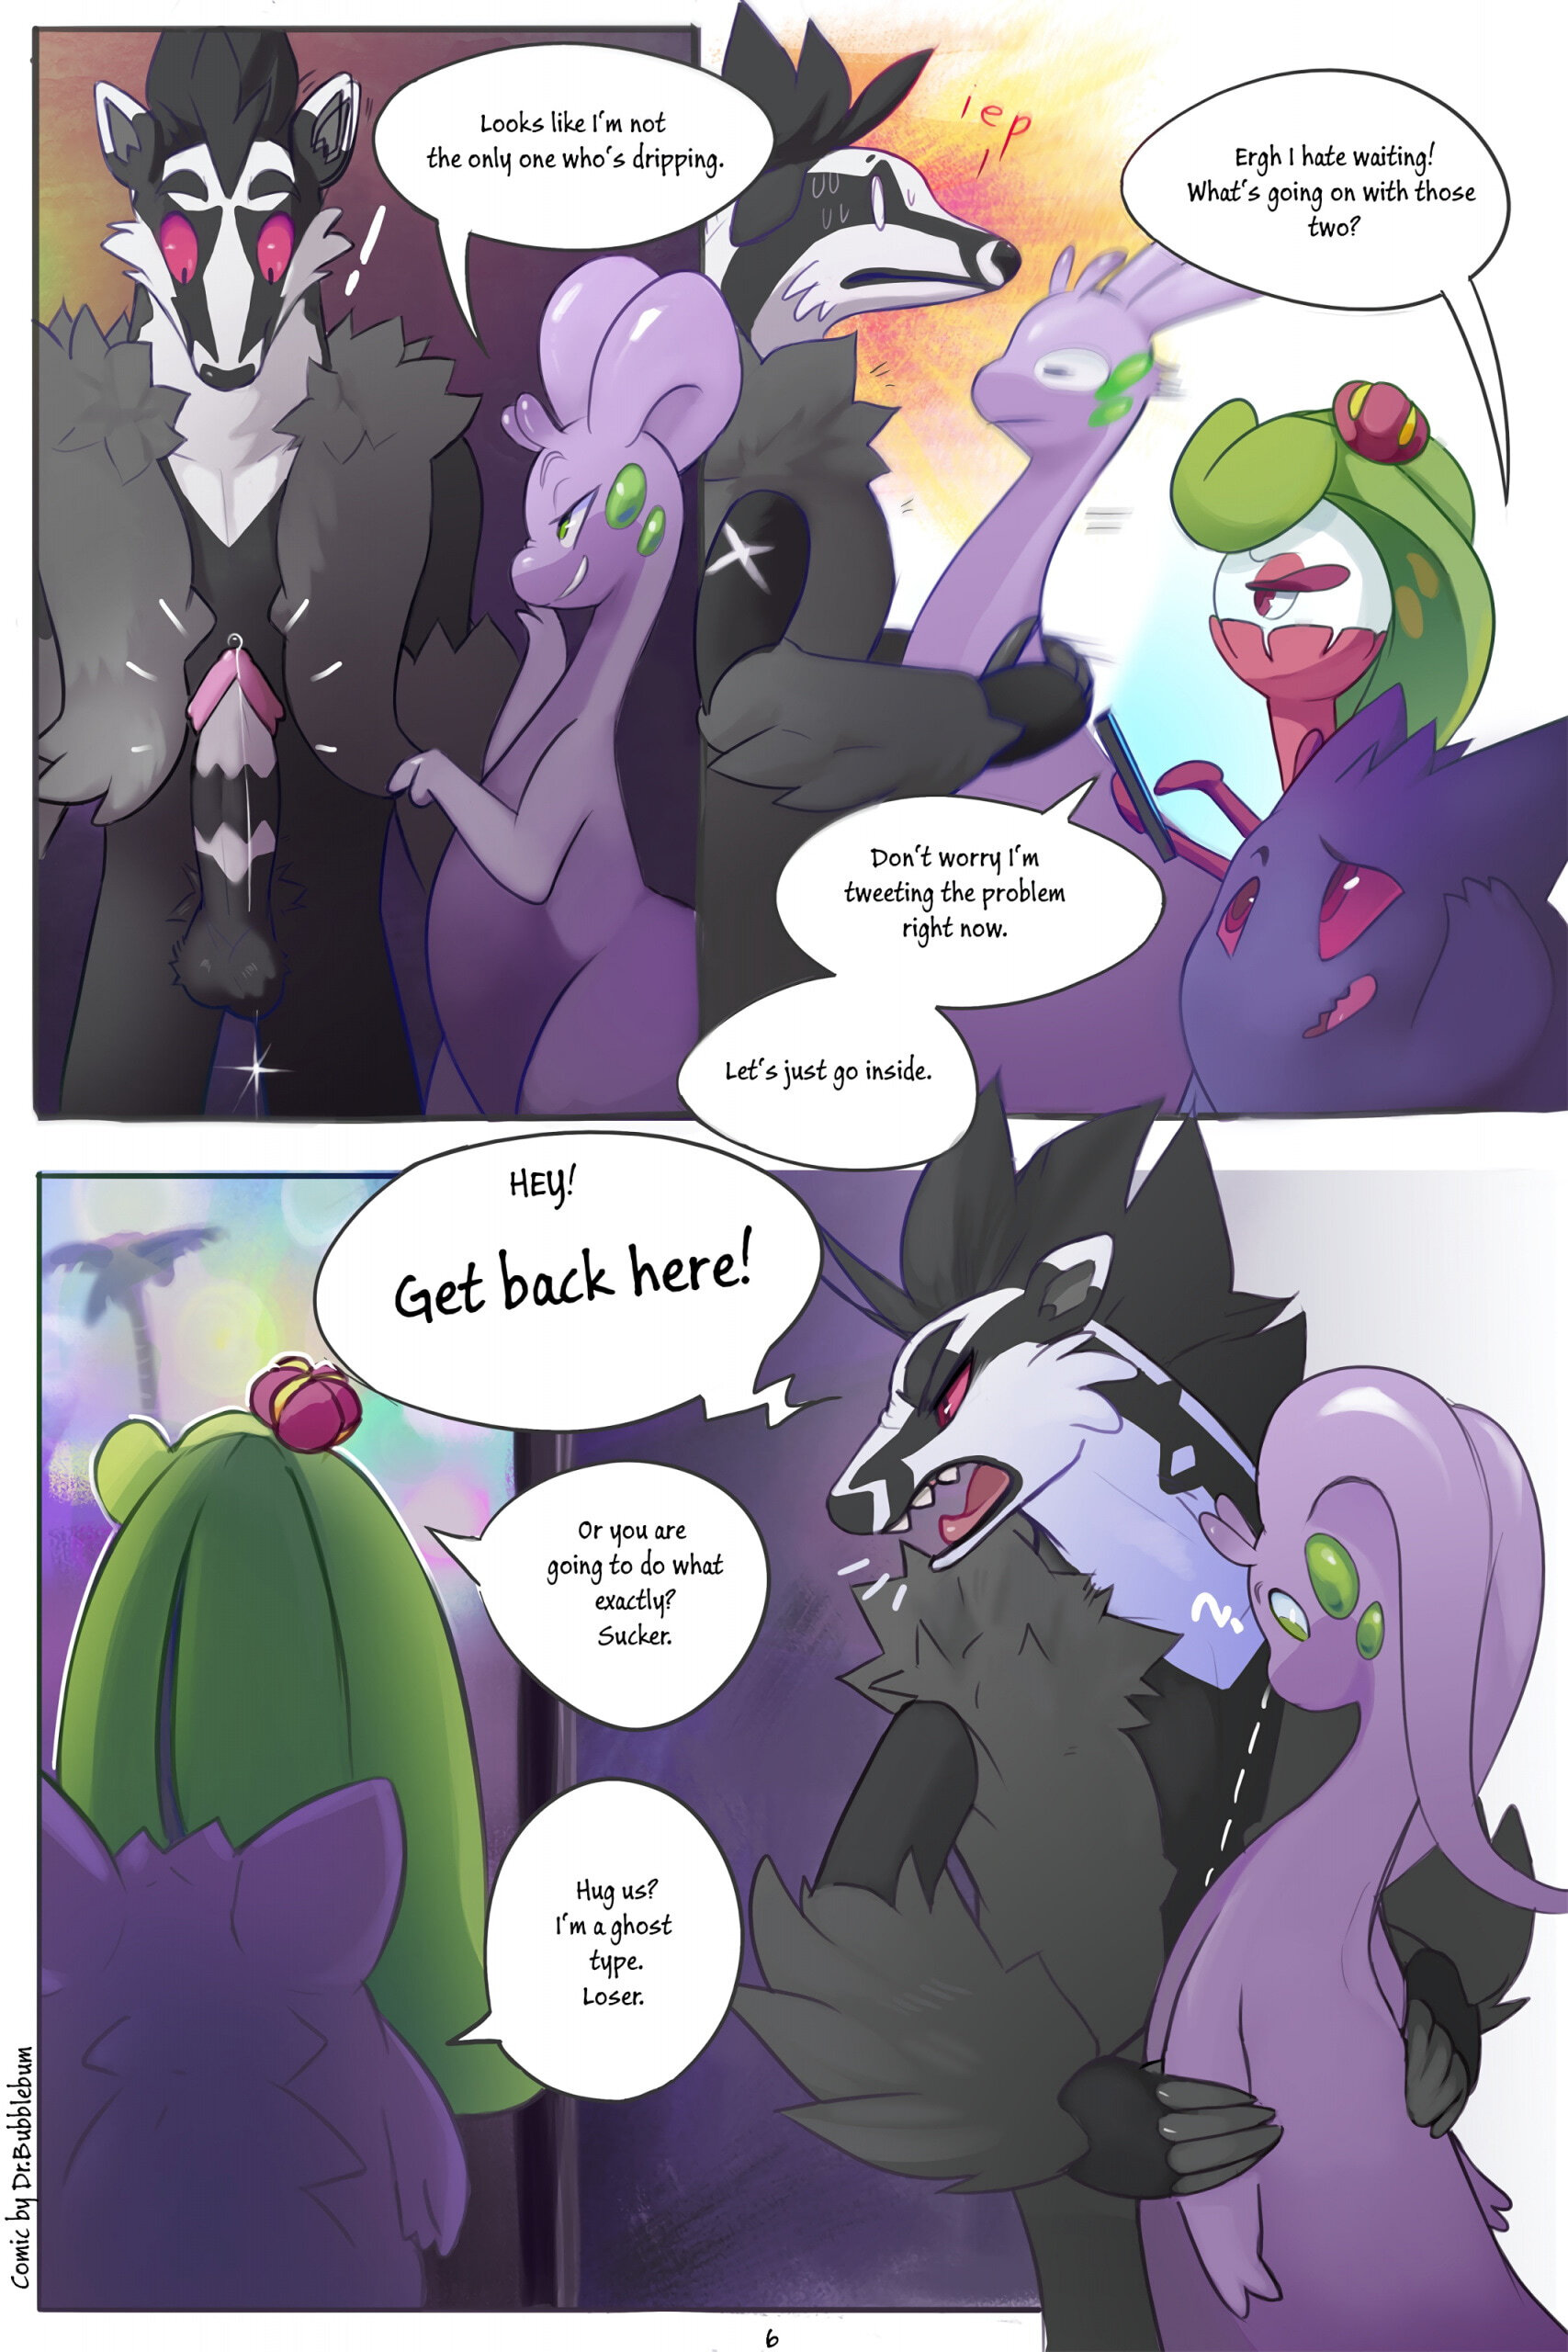 Getting in! - Page 6